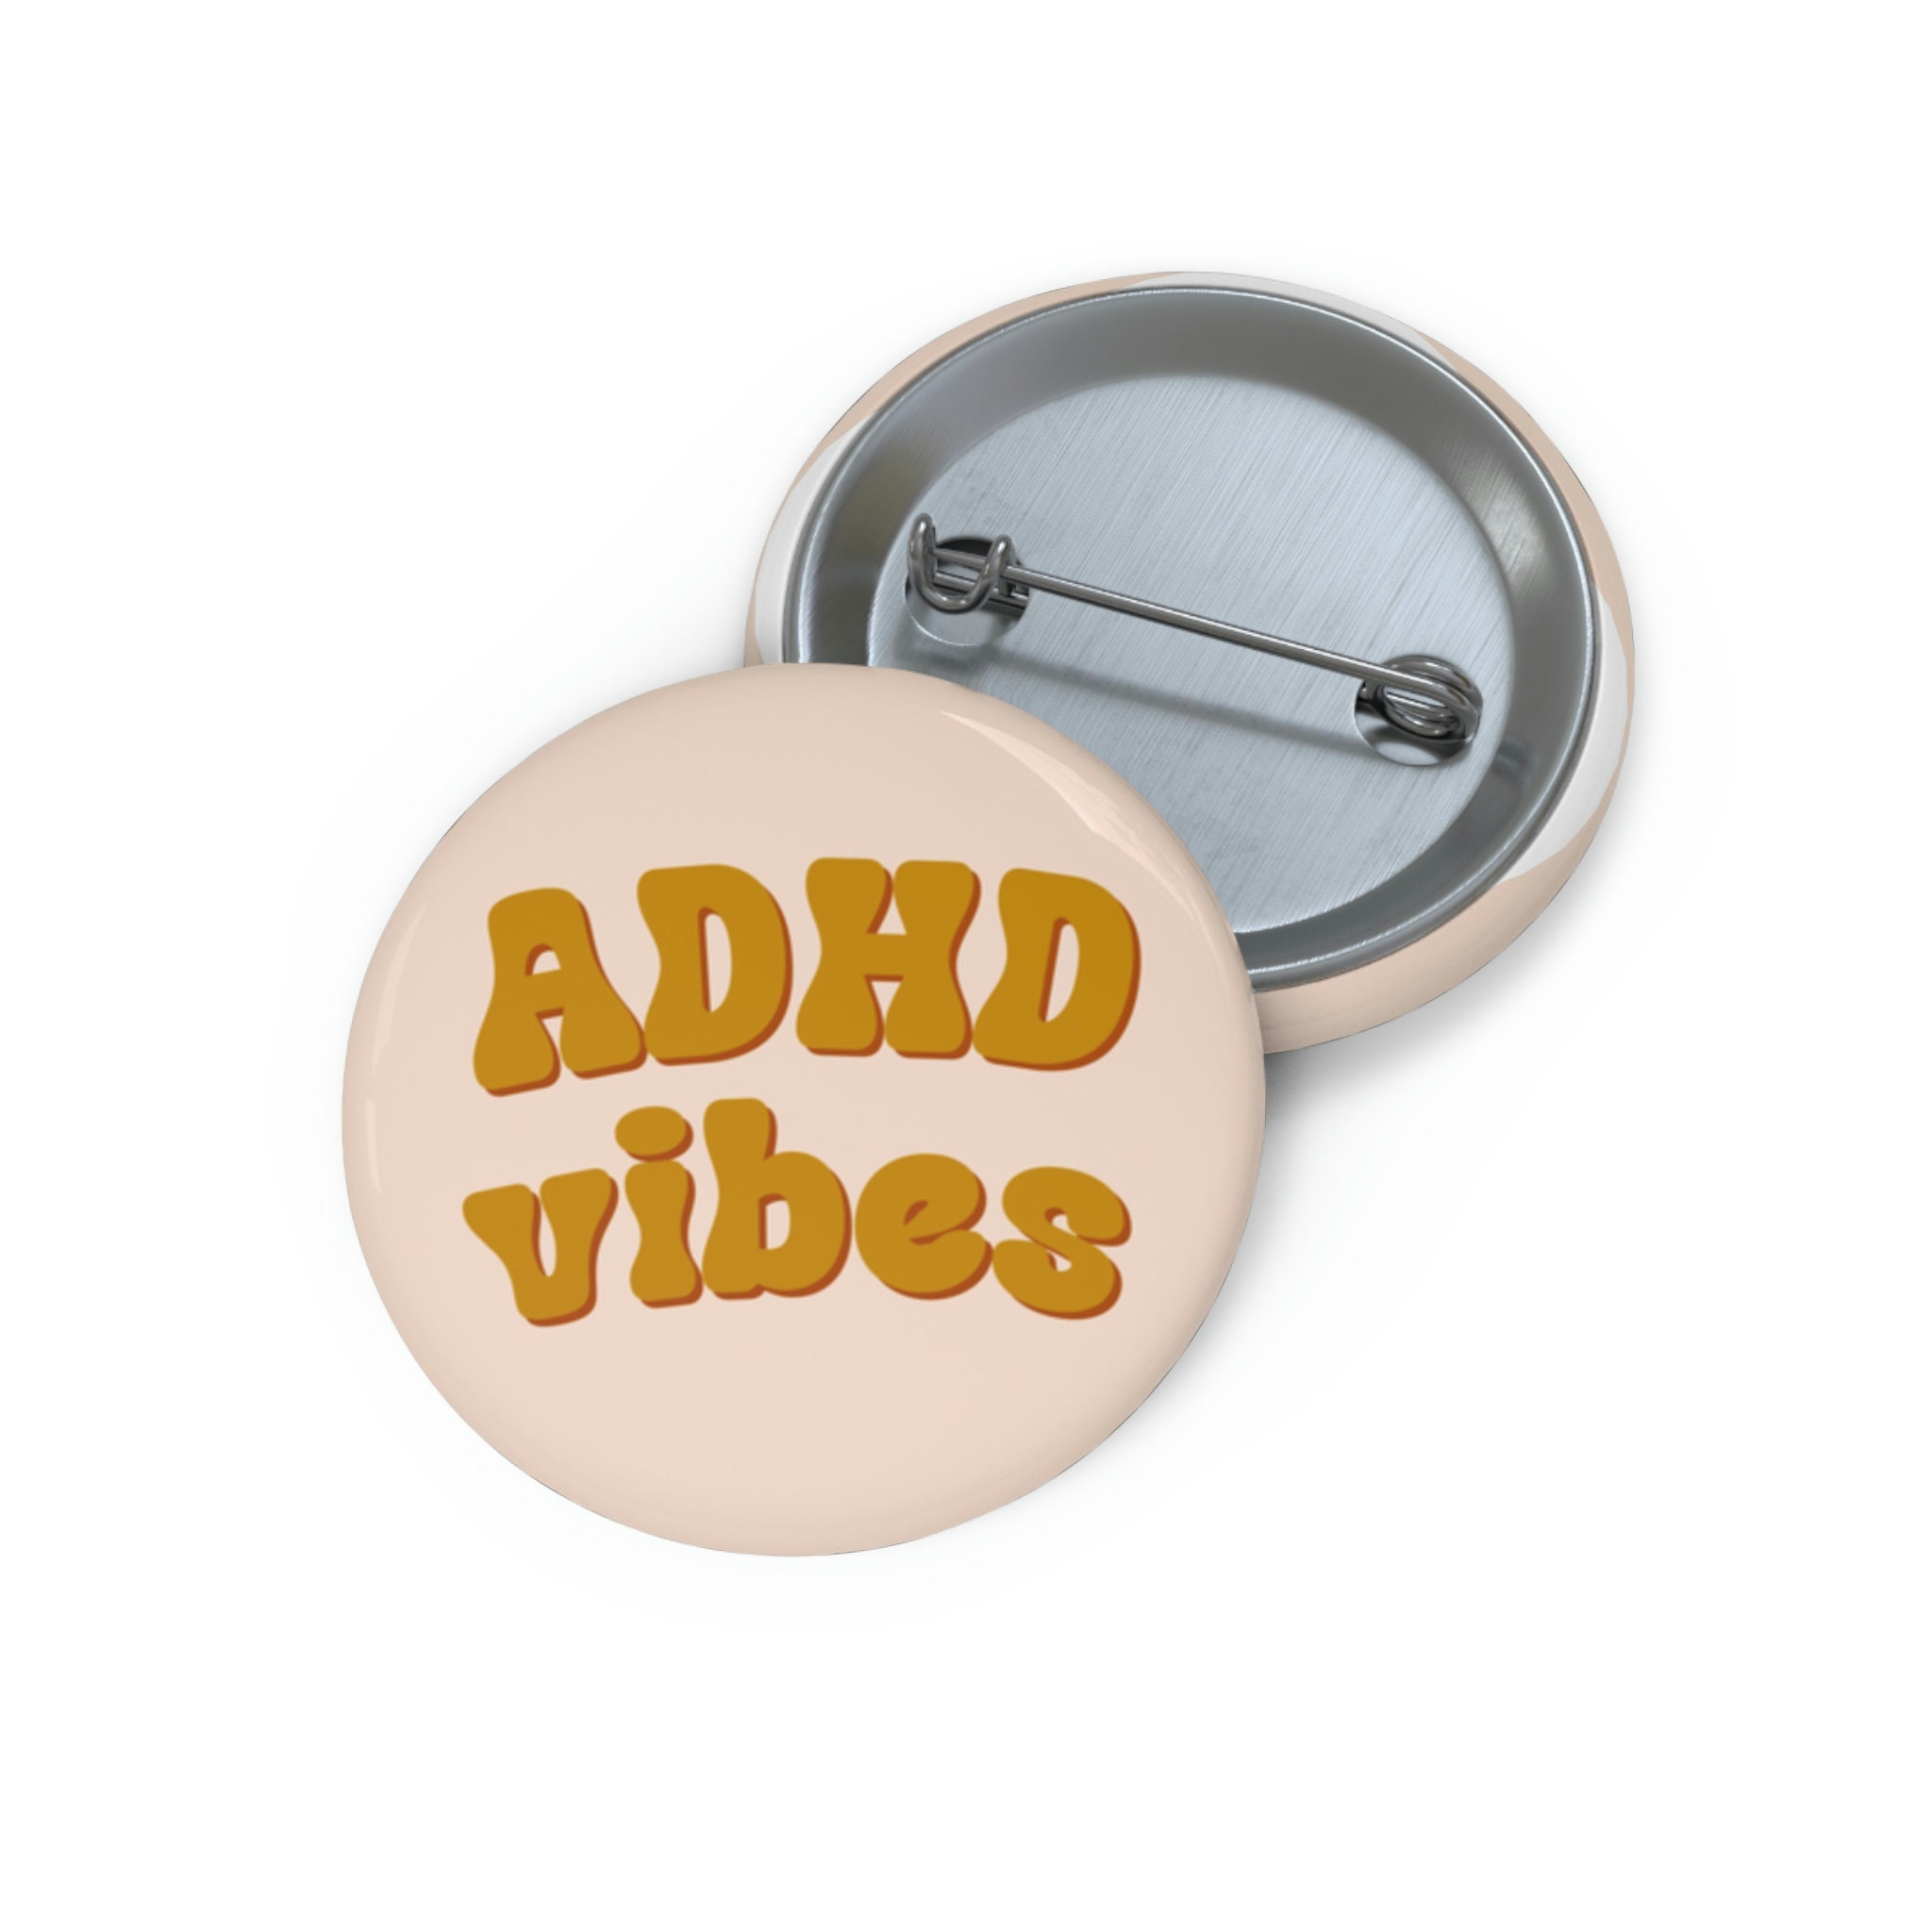 32mm Hidden Disabilities Badge Pins Animals, Autism, ADHD, PTSD, Sensory  Overload, Sound, Ocd, Bpd Updated With More Animals 